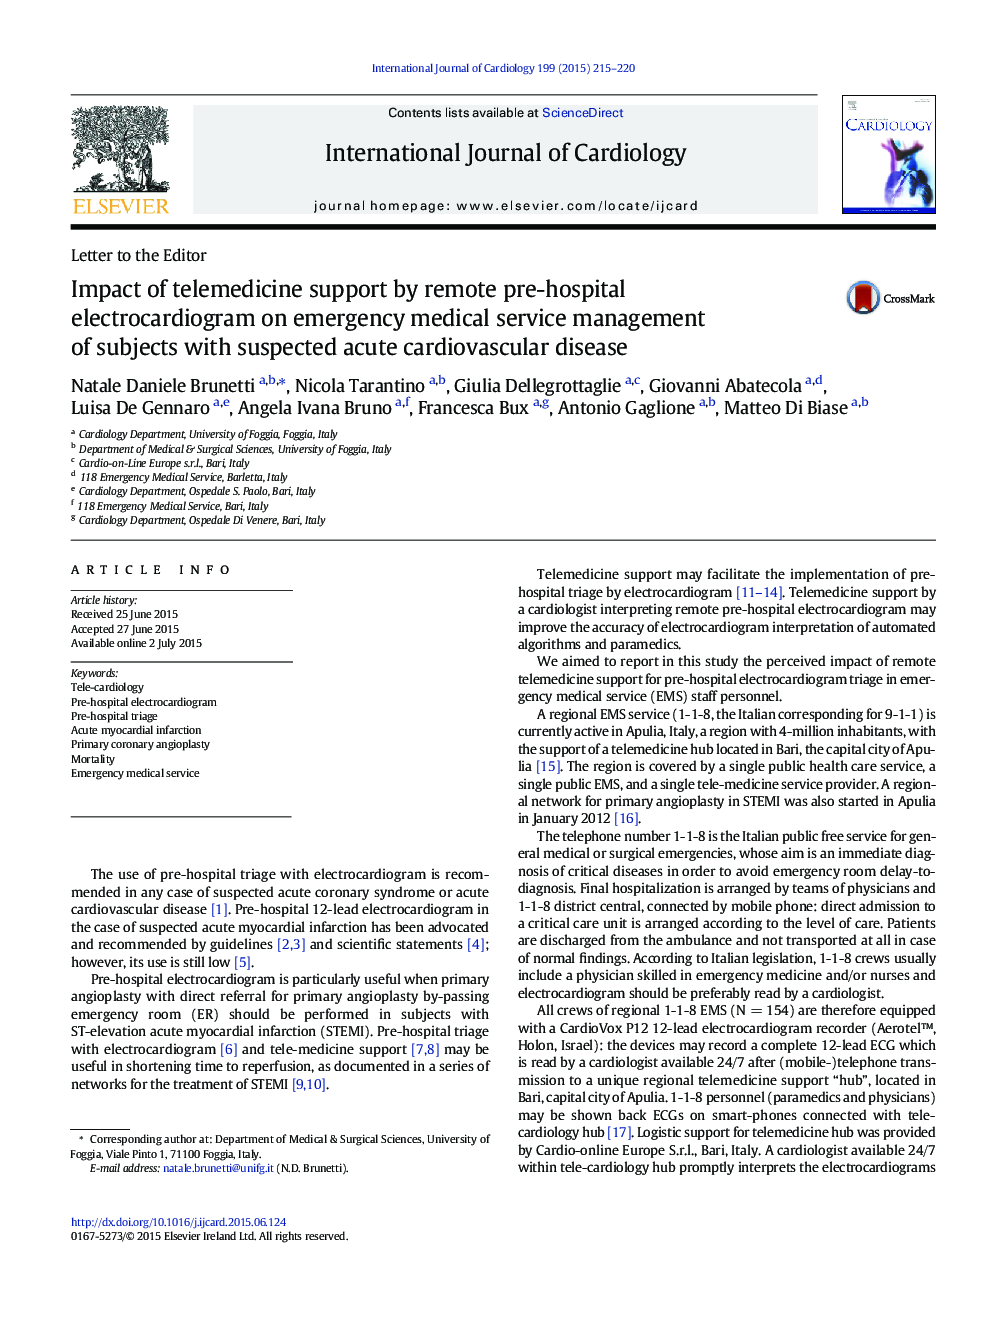 Impact of telemedicine support by remote pre-hospital electrocardiogram on emergency medical service management of subjects with suspected acute cardiovascular disease